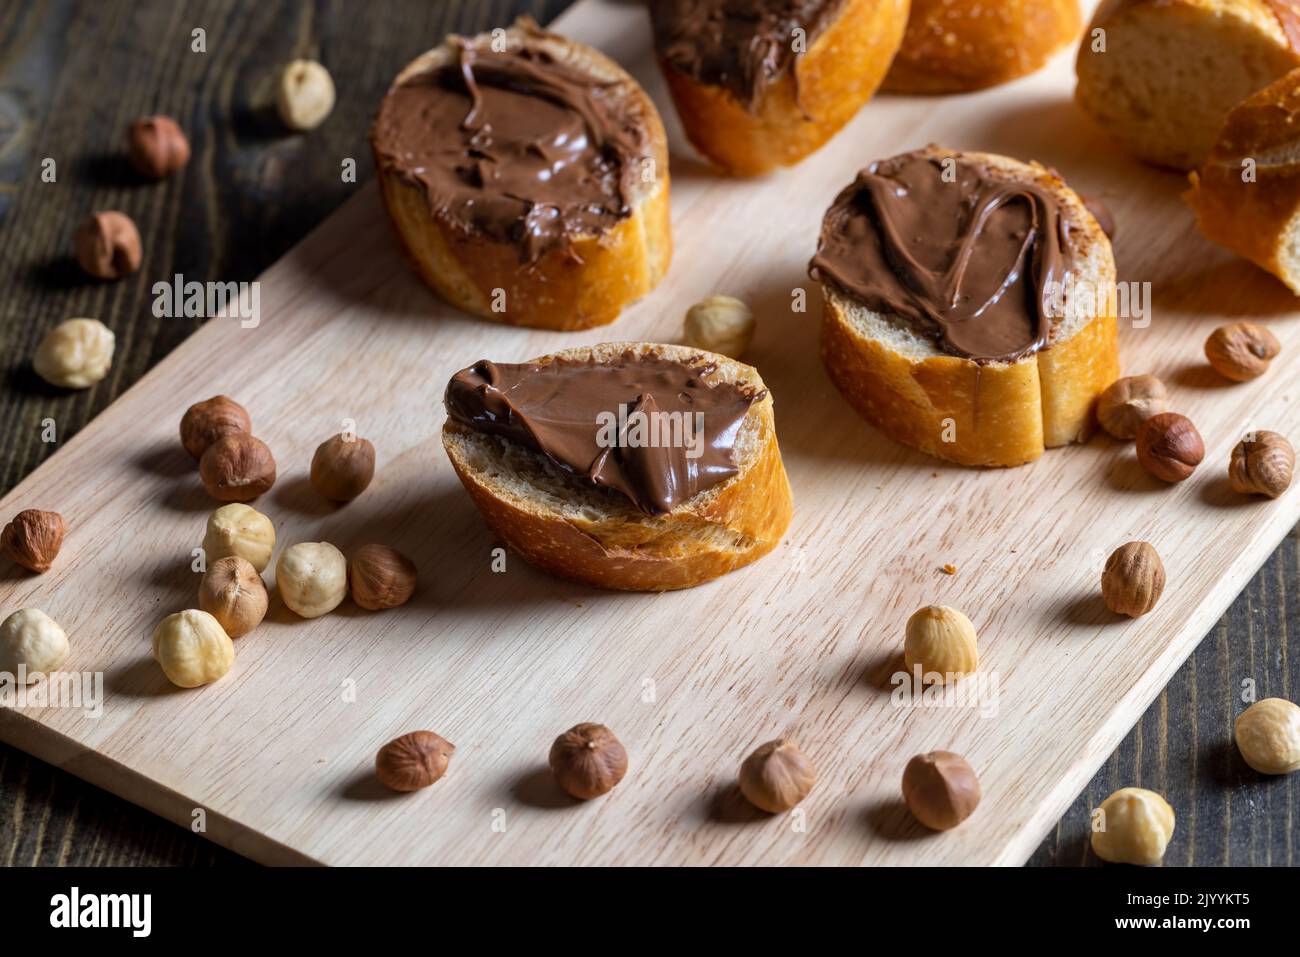 chocolate butter spread on a baguette, sweet chocolate butter spread on a baguette during the preparation of a simple dessert at home Stock Photo